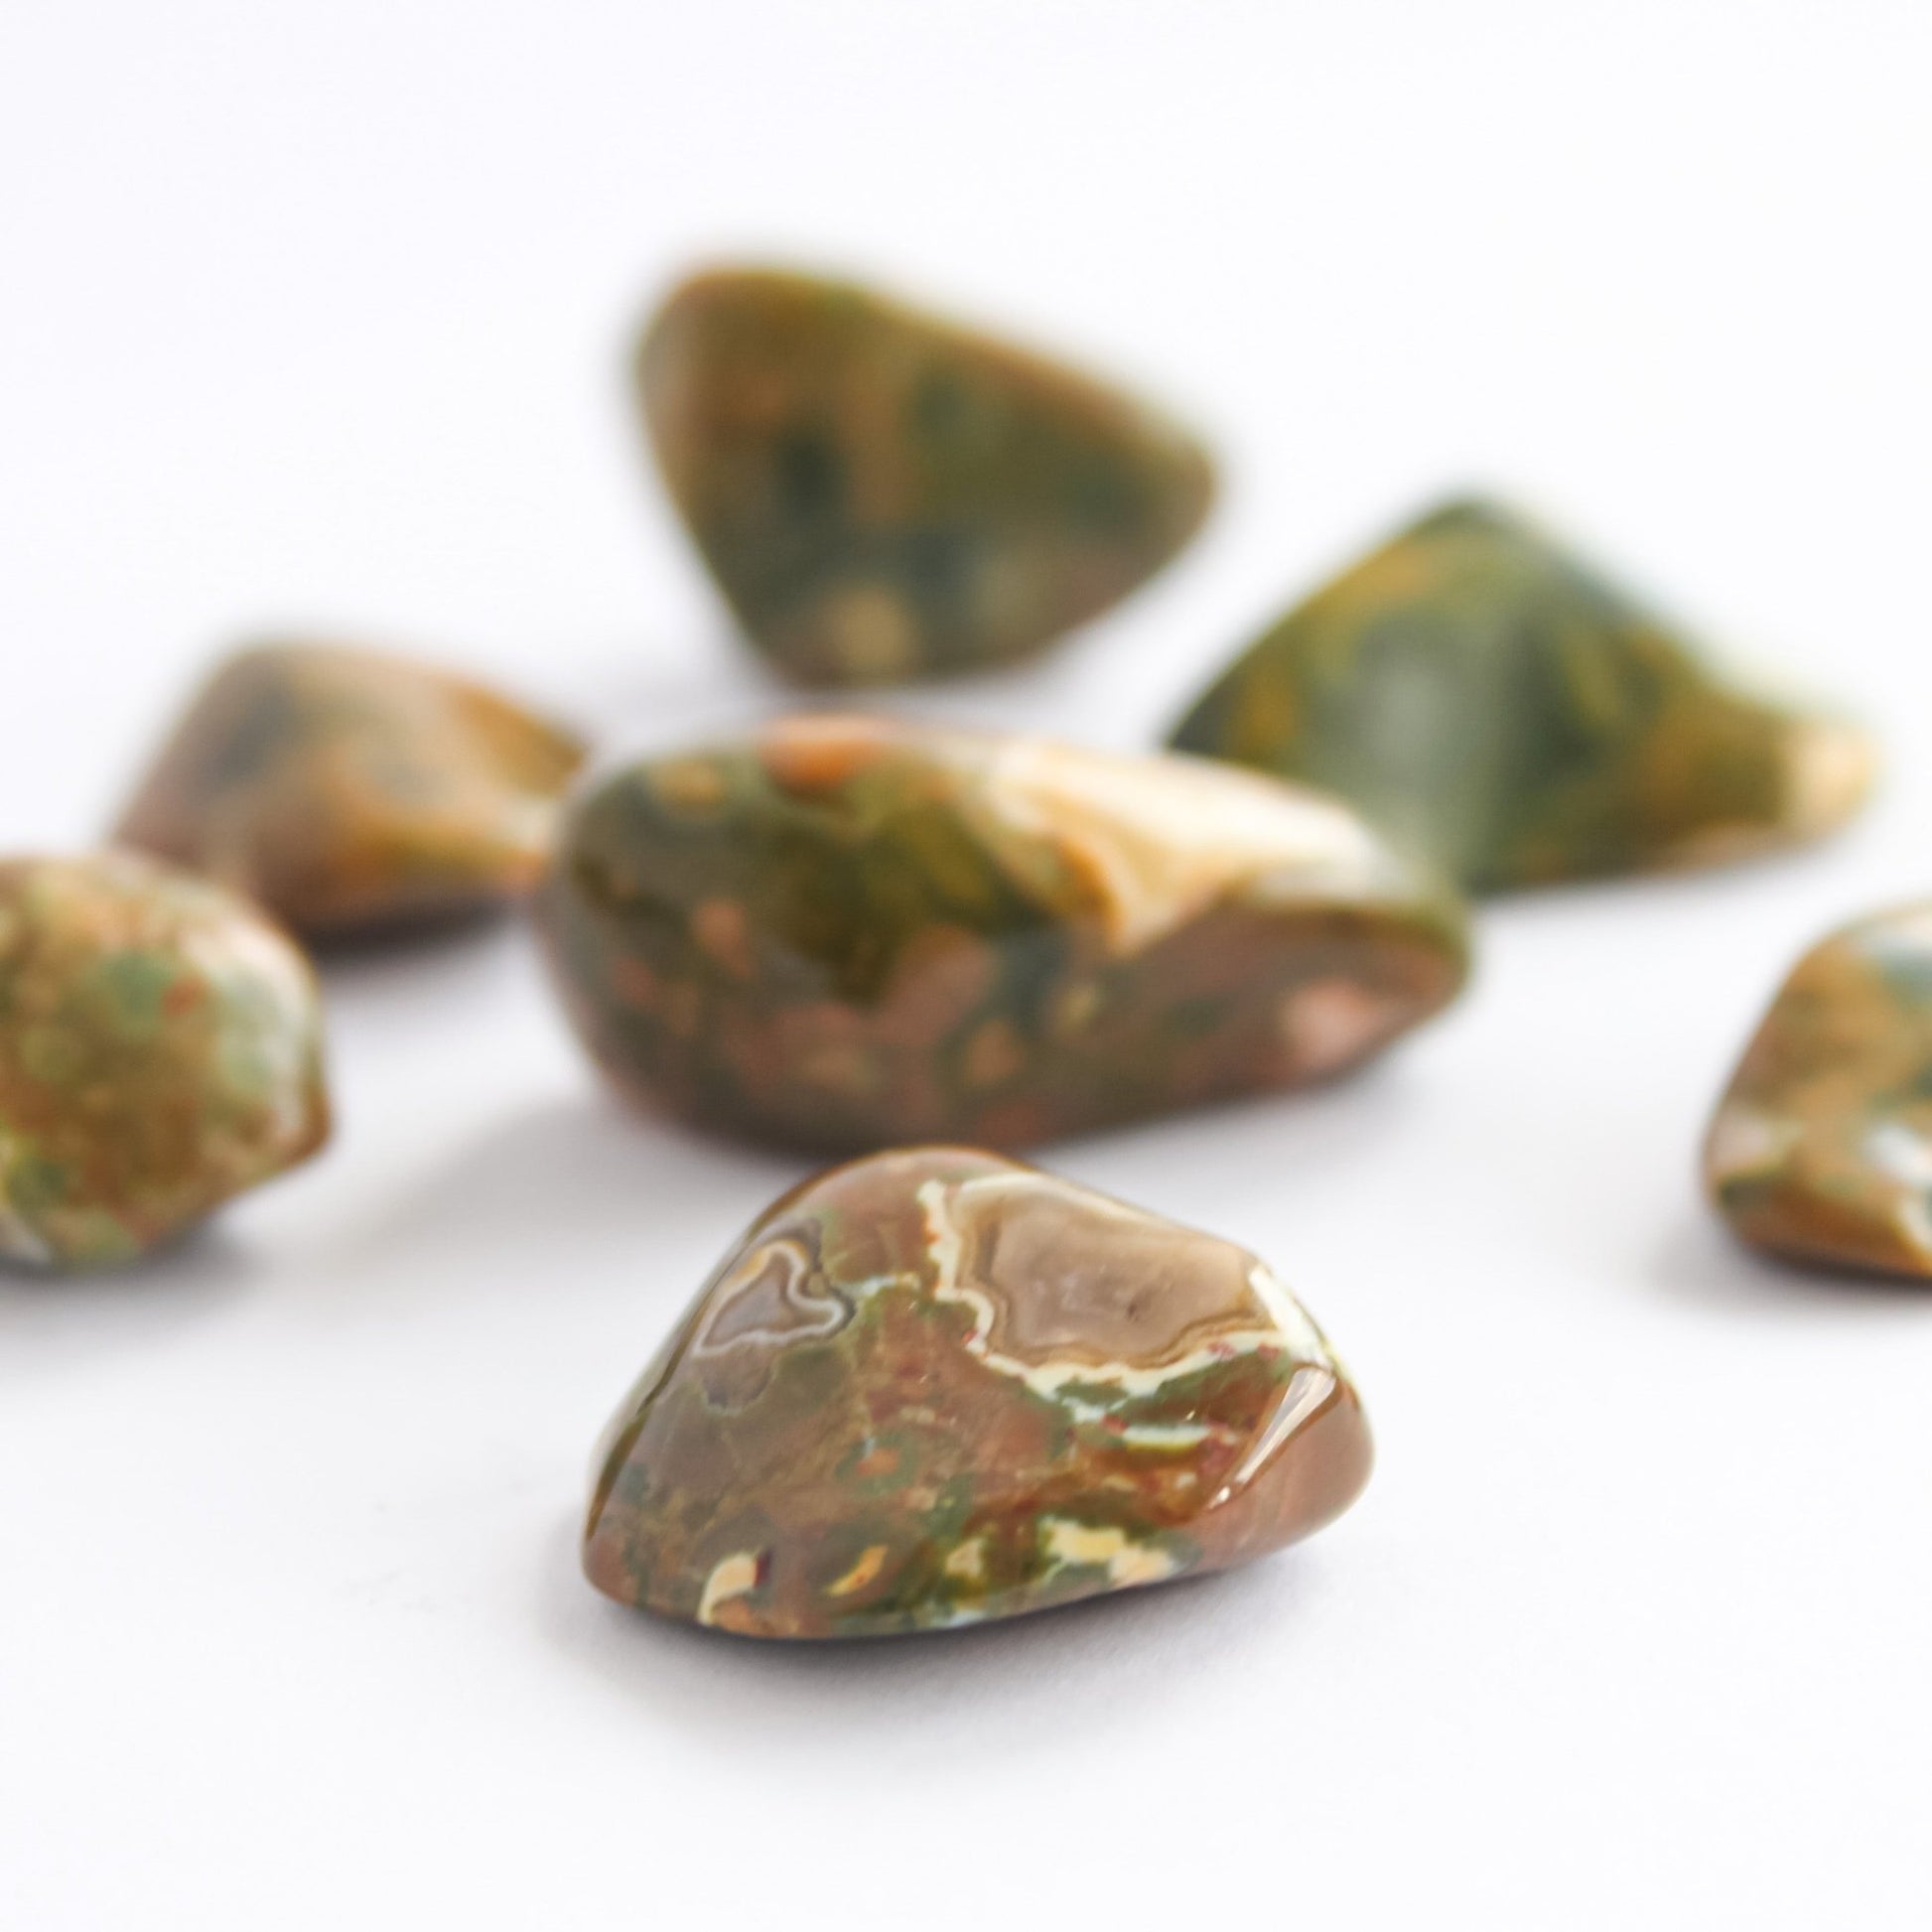 Rainforest Rhyolite Tumble - Conscious Crystals New Zealand Crystal and Spiritual Shop